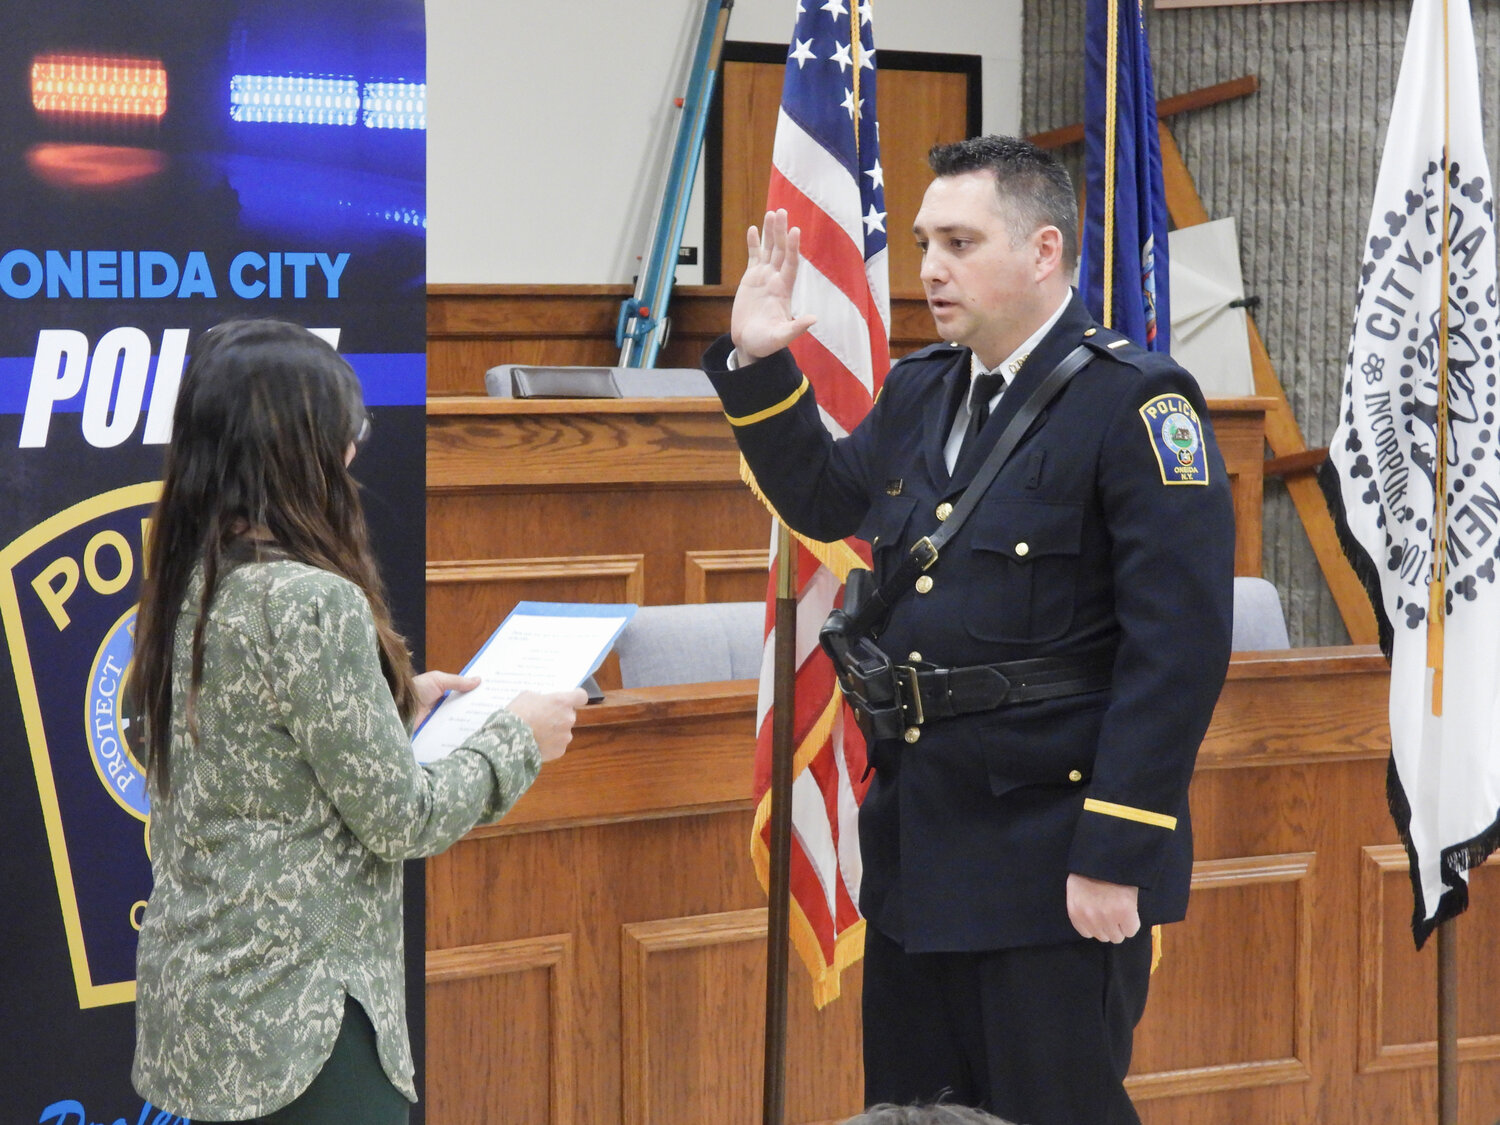 Lieutenant Keith Hudson takes takes his oath at a swearing-in ceremony in the Oneida Common Council on Thursday, March 9. Hudson transferred from the Cazenovia Police Department in 2008, returning to his hometown. He preforms many administrative roles with various IT systems at the Department